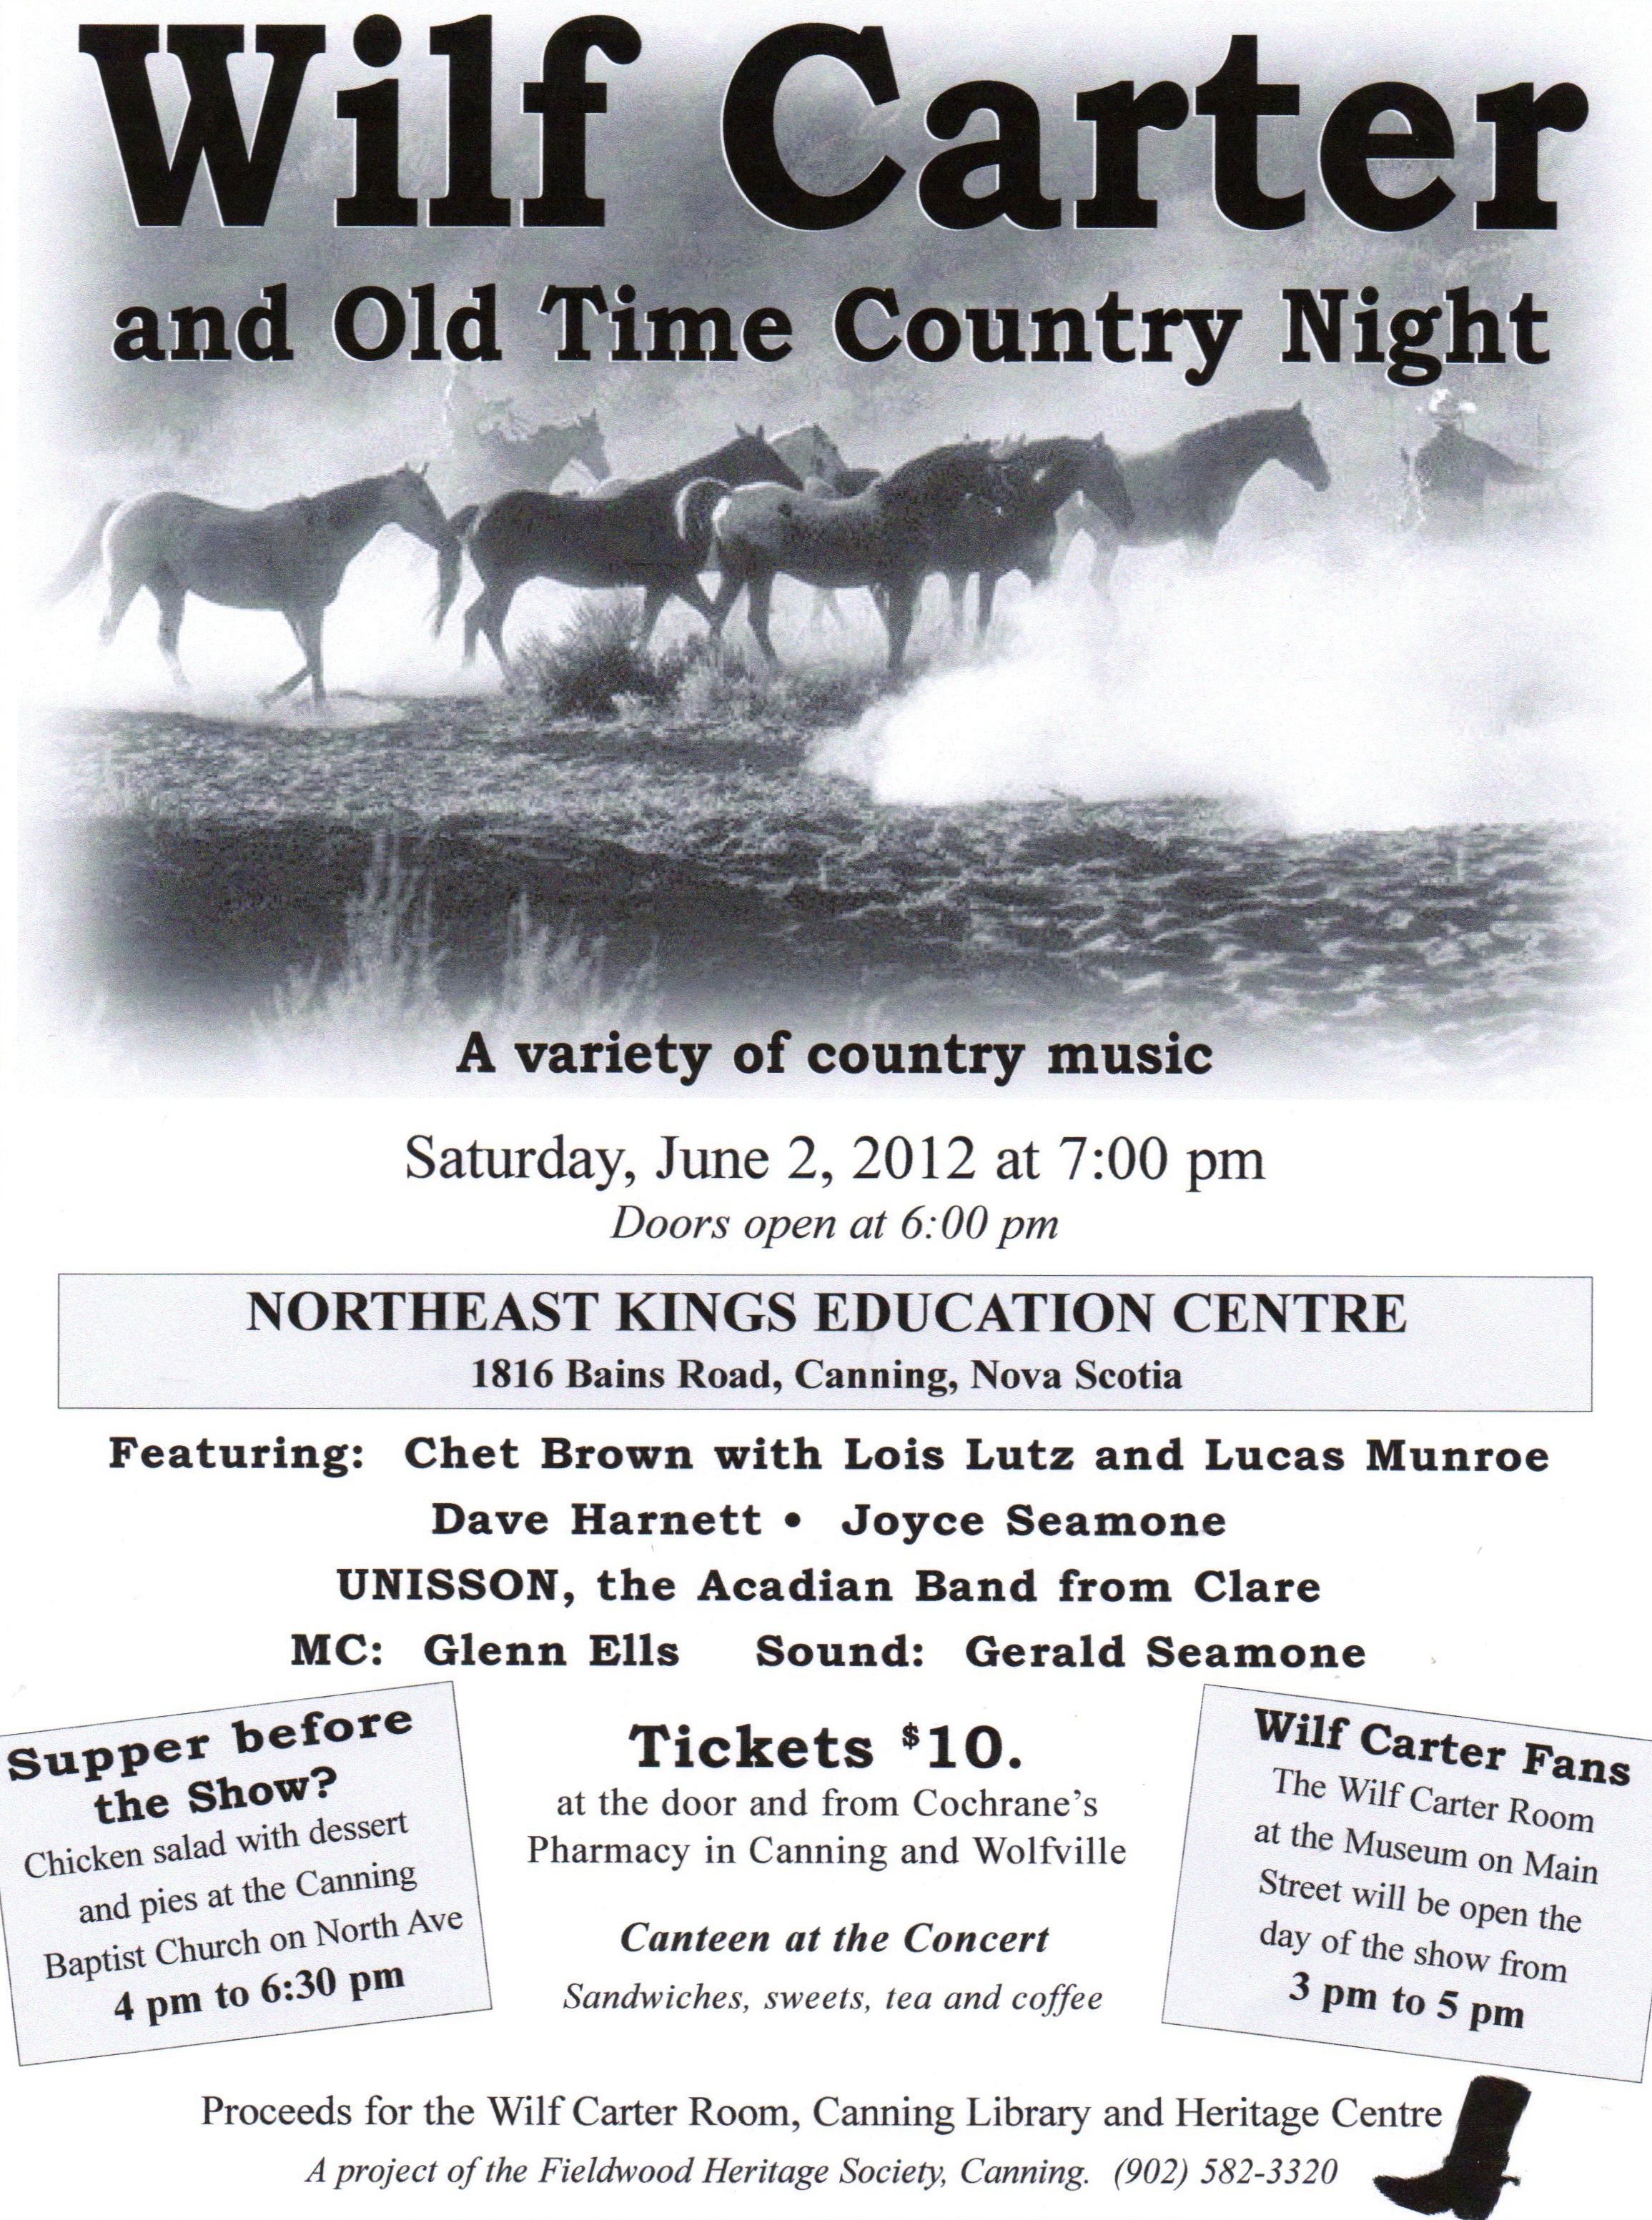 Poster: Fieldwood Heritage Society, Wilf Carter and Old Time Country Night, Saturday, June 2, 2012